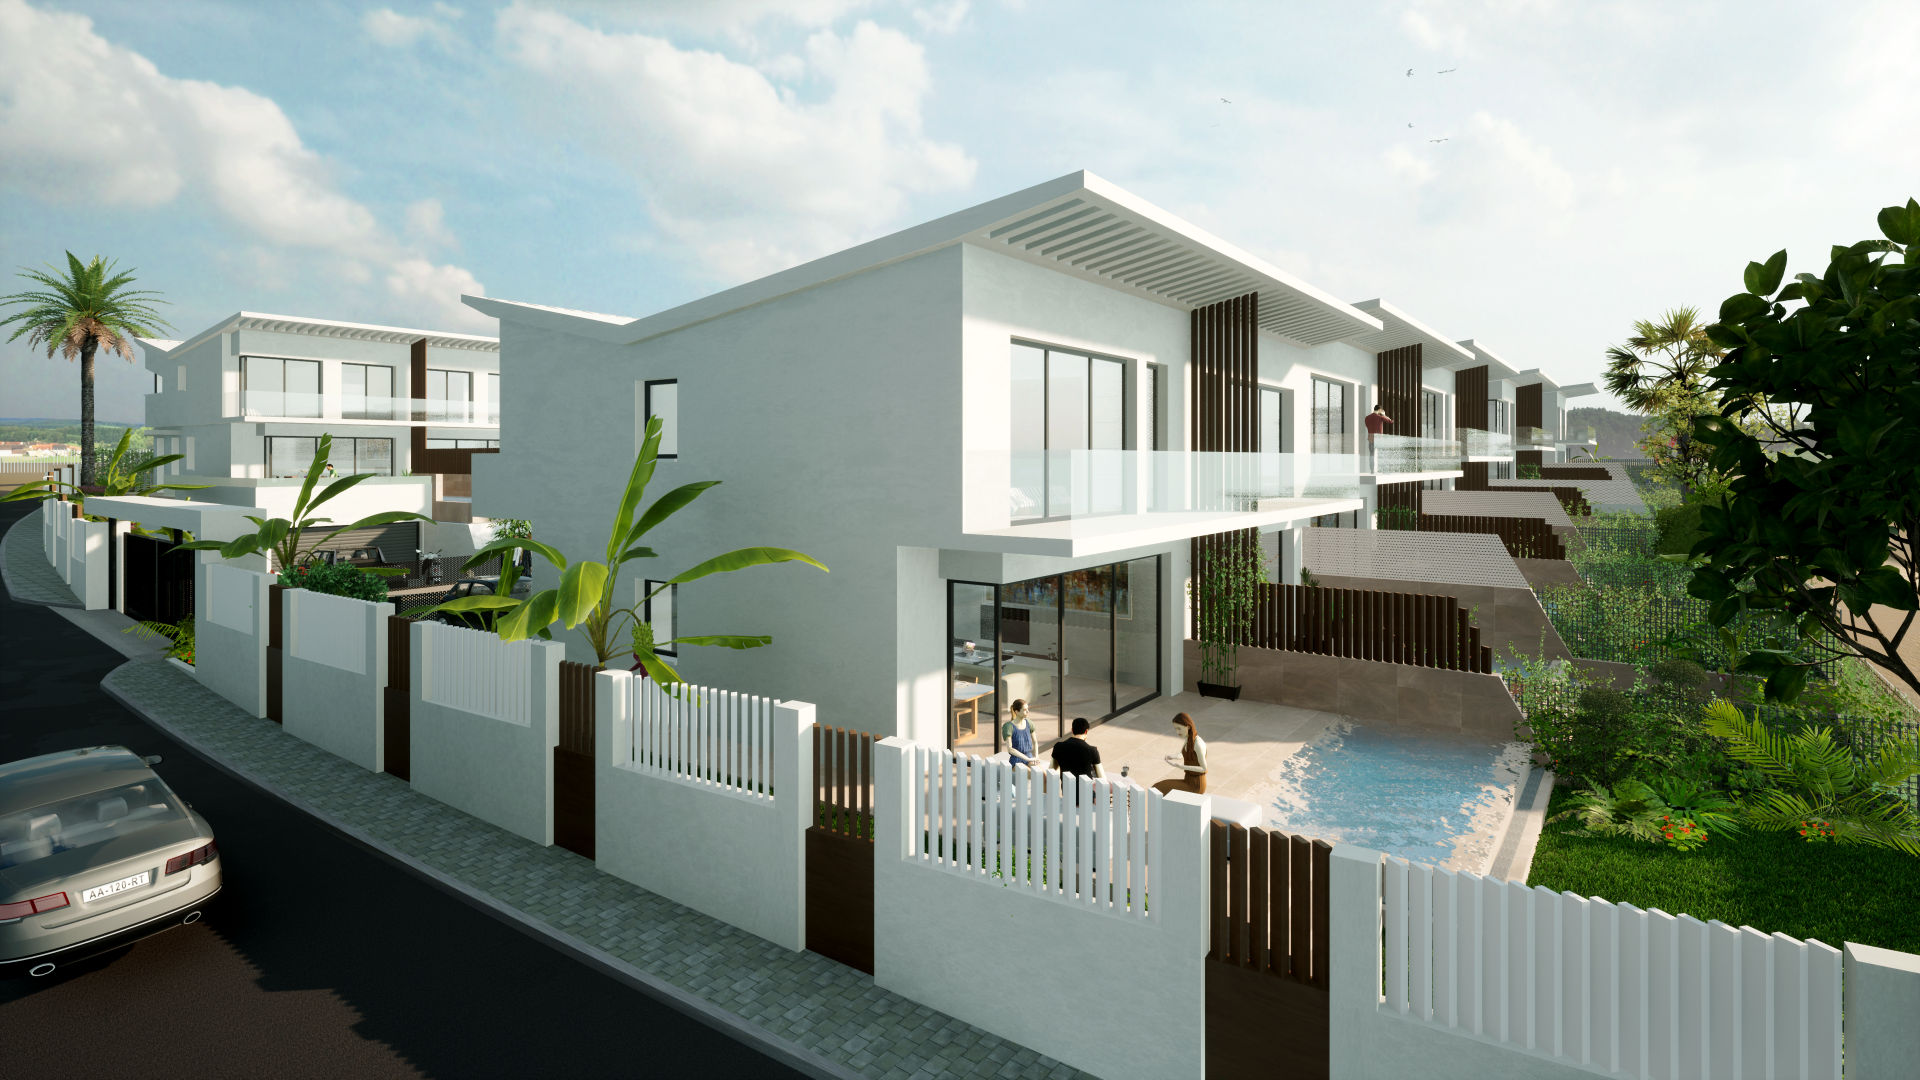 New modern detached villas, semidetached and townhouses for sale in La Cala - Mijas Costa